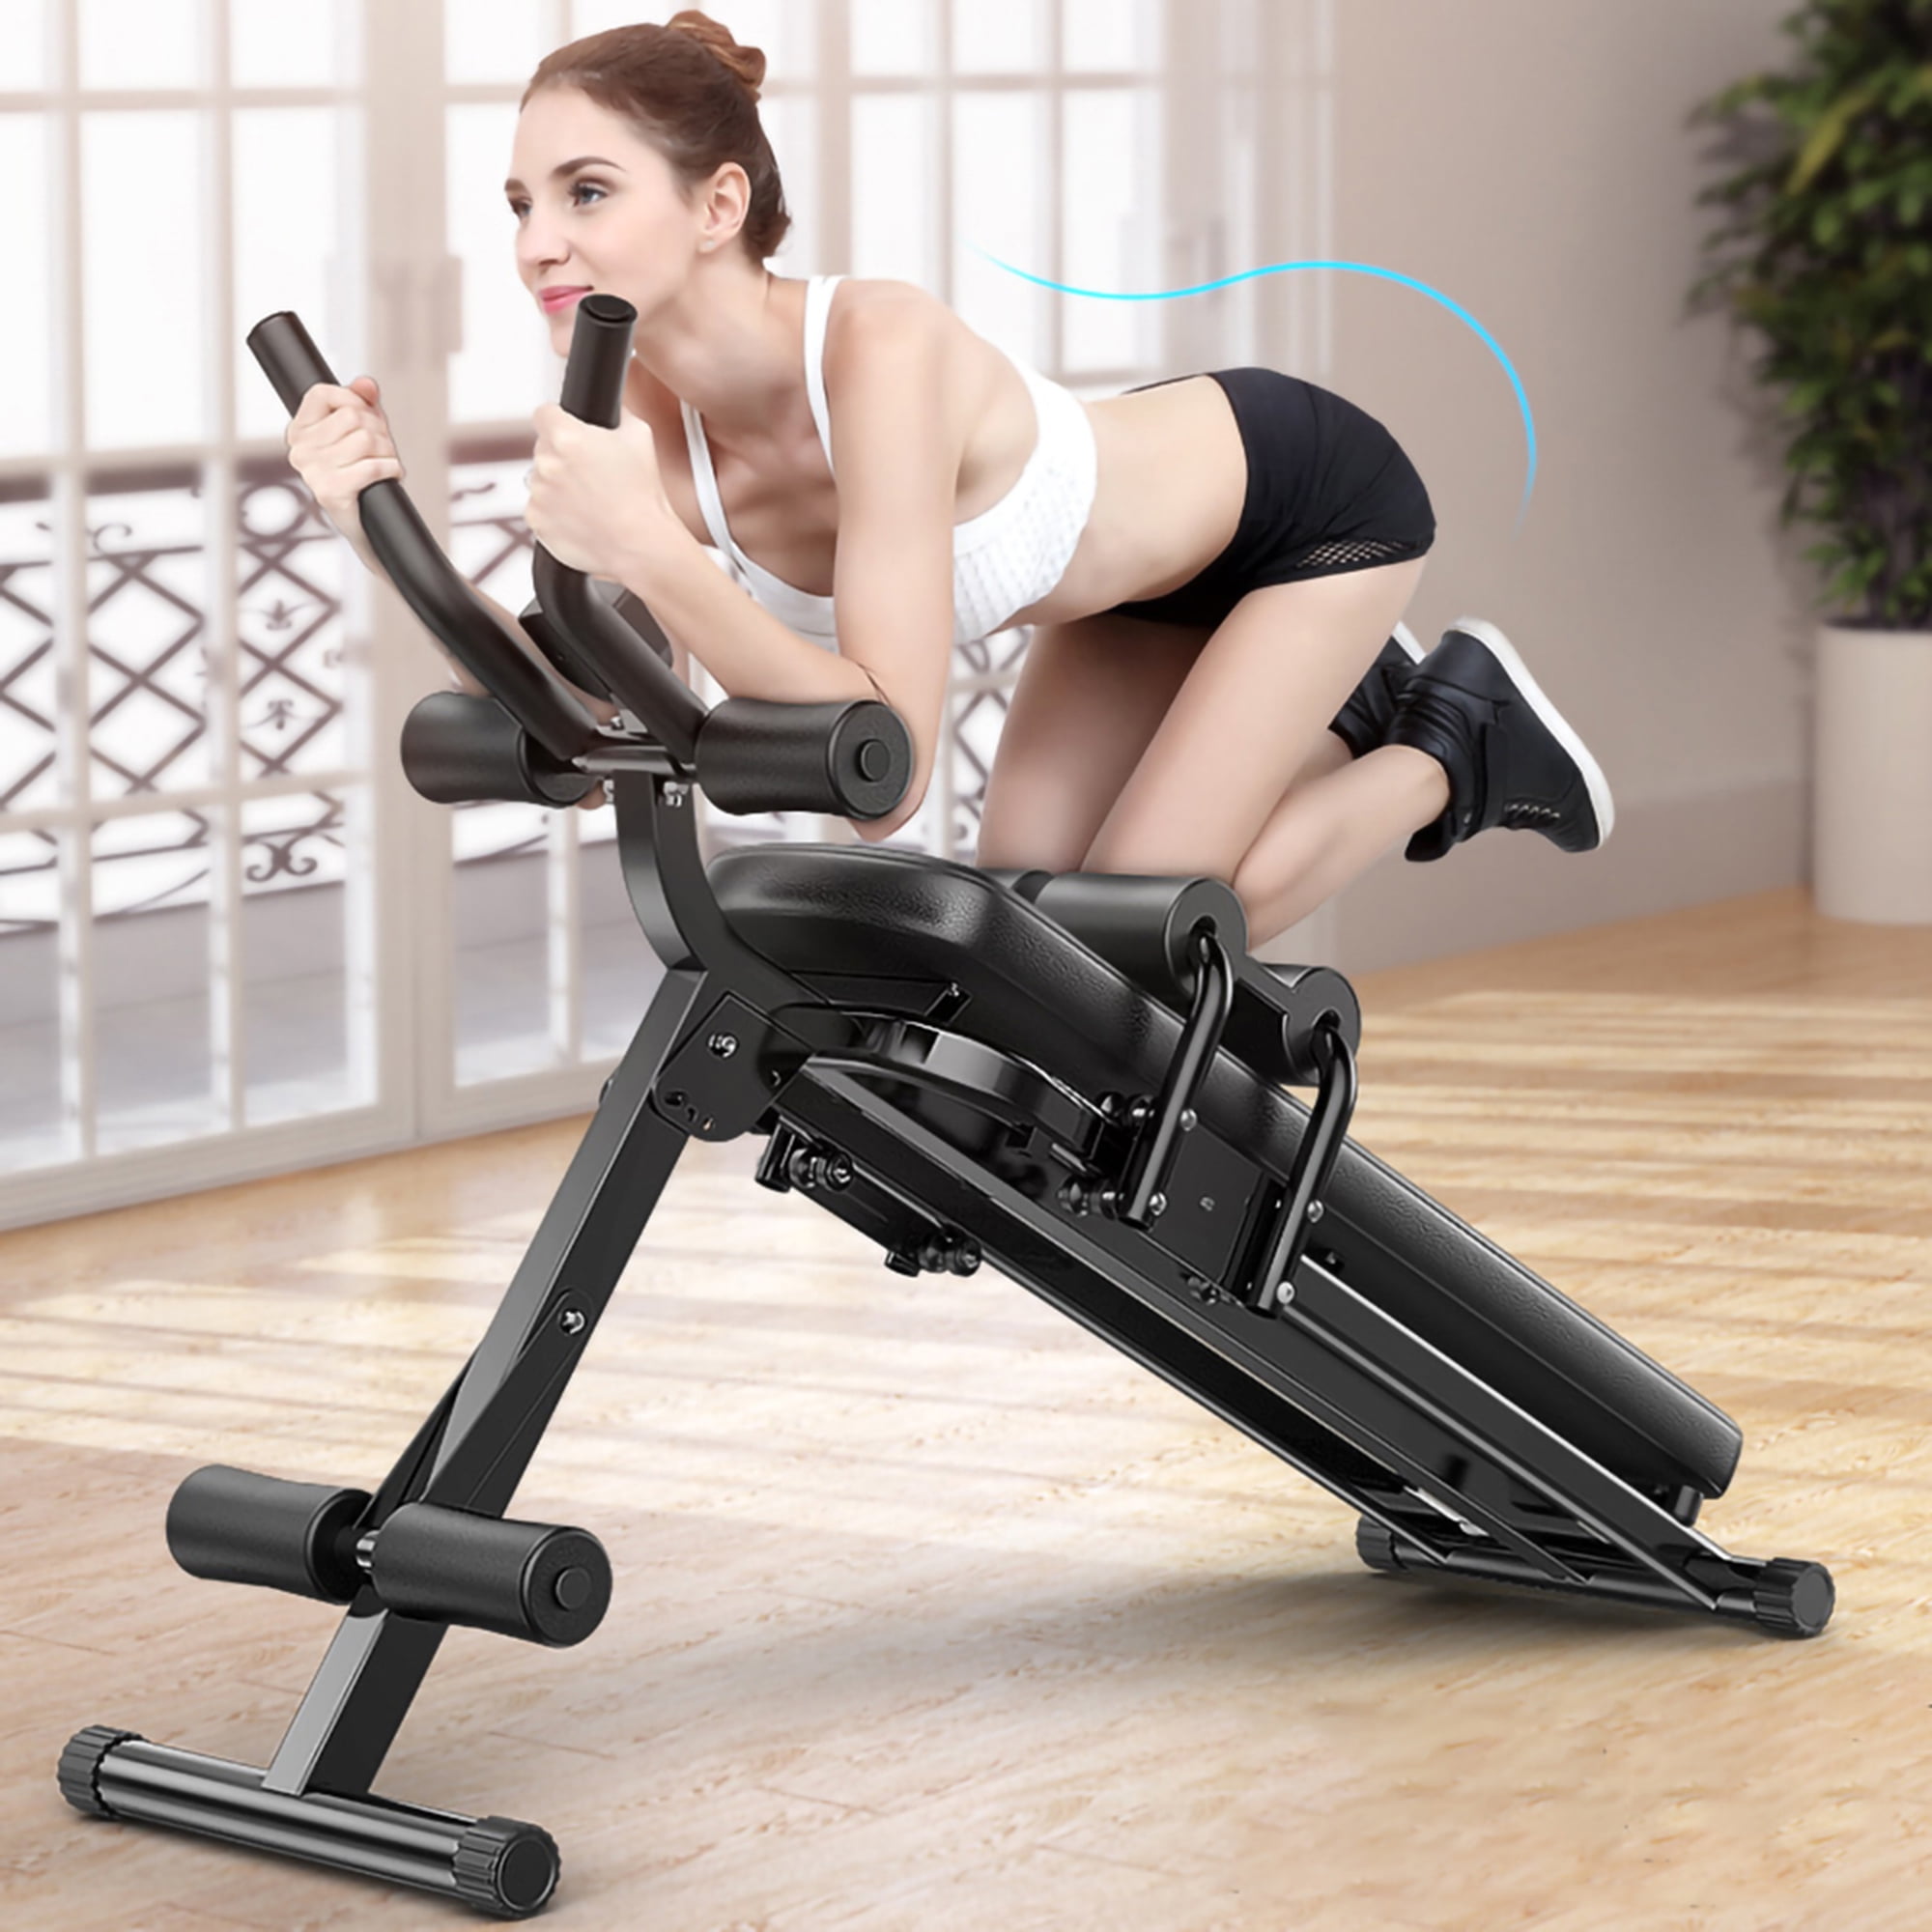 Details about   Foldable LCD Sit Up Bench Adjustable Abdominal Trainer Home Gym Exercise 